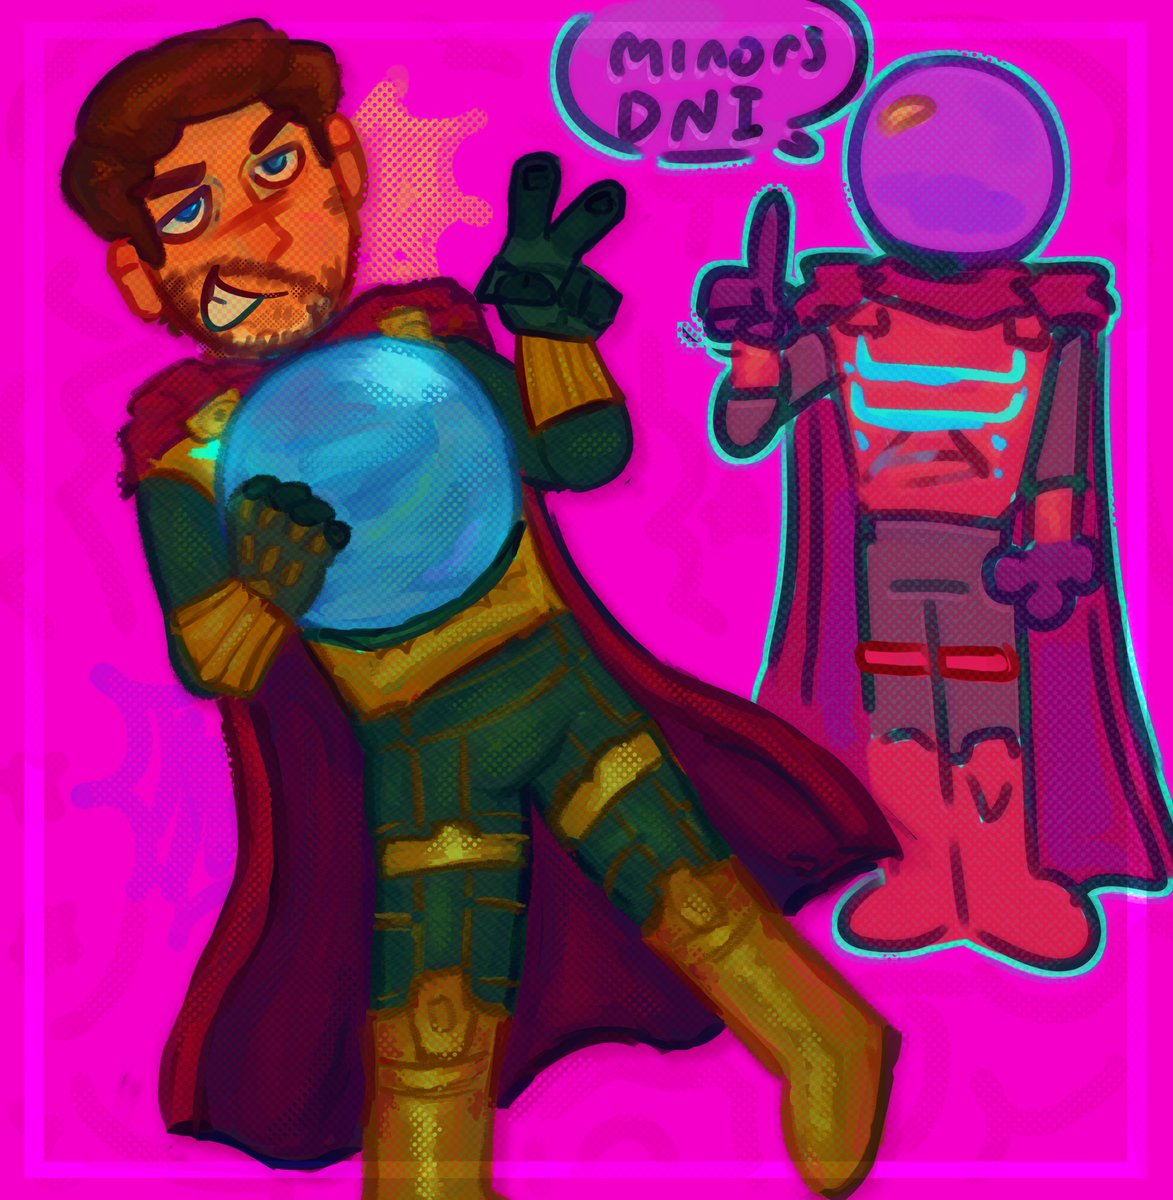 uhhbh i dont hsve a caption 4 this
[ #spiderman #spidermanfarfromhome #mysterio ]